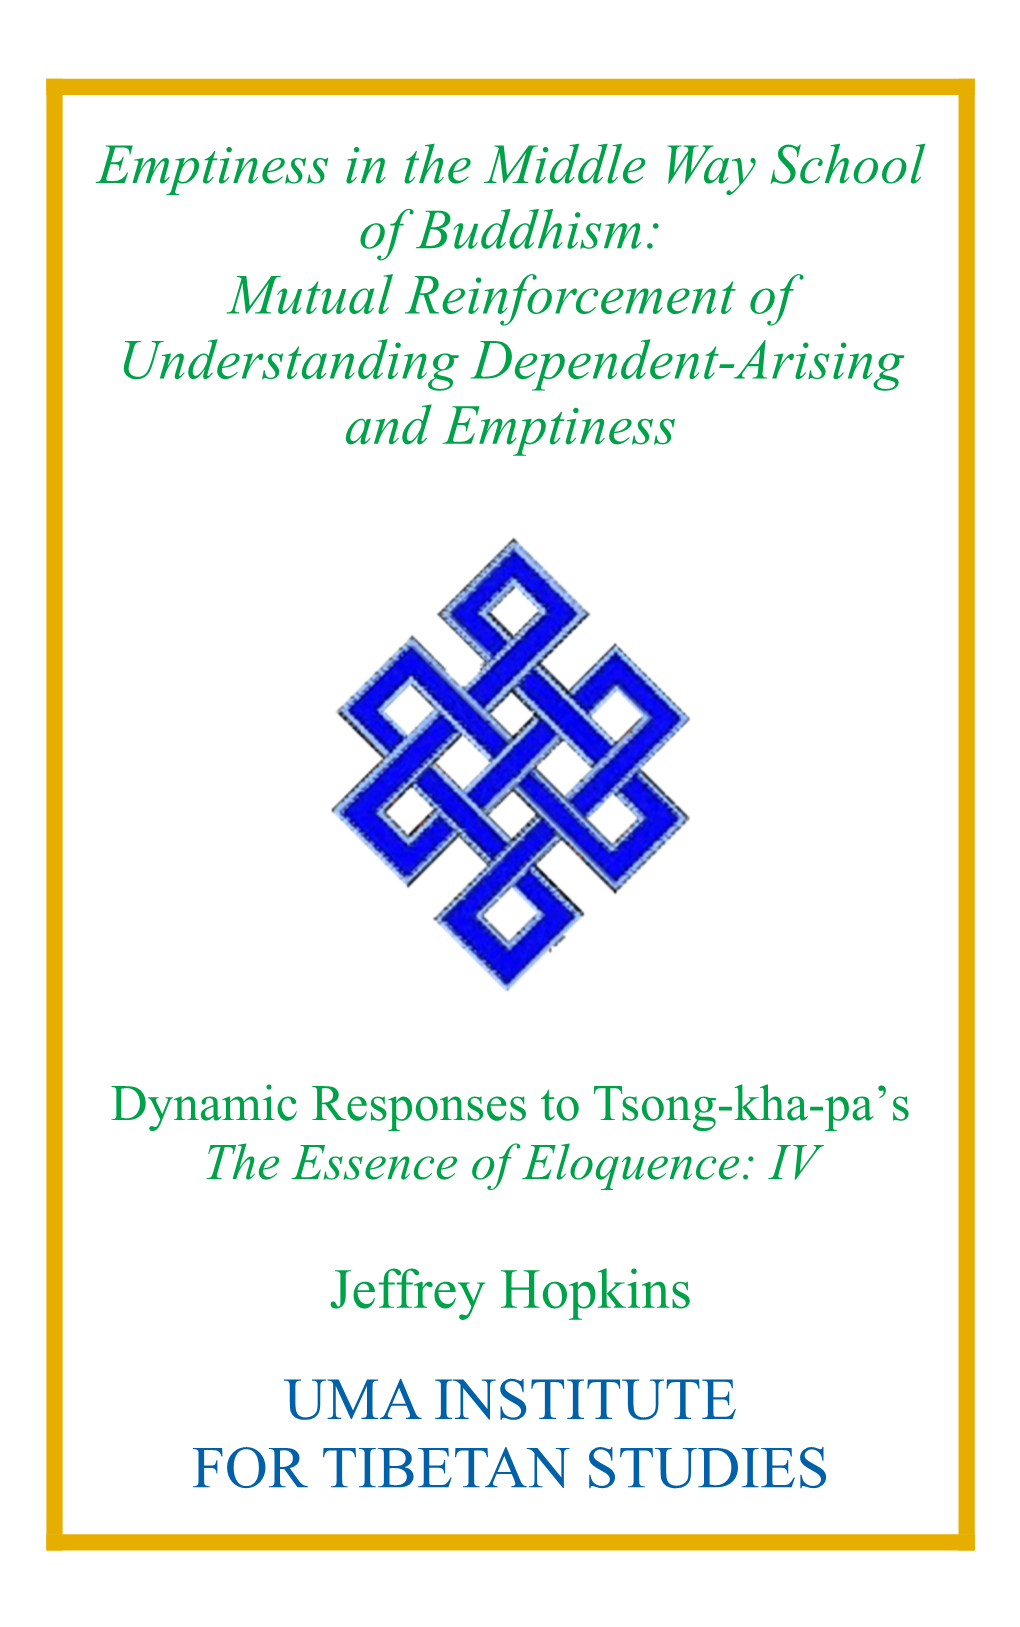 Emptiness in the Middle Way School of Buddhism: Mutual Reinforcement of Understanding Dependent-Arising and Emptiness